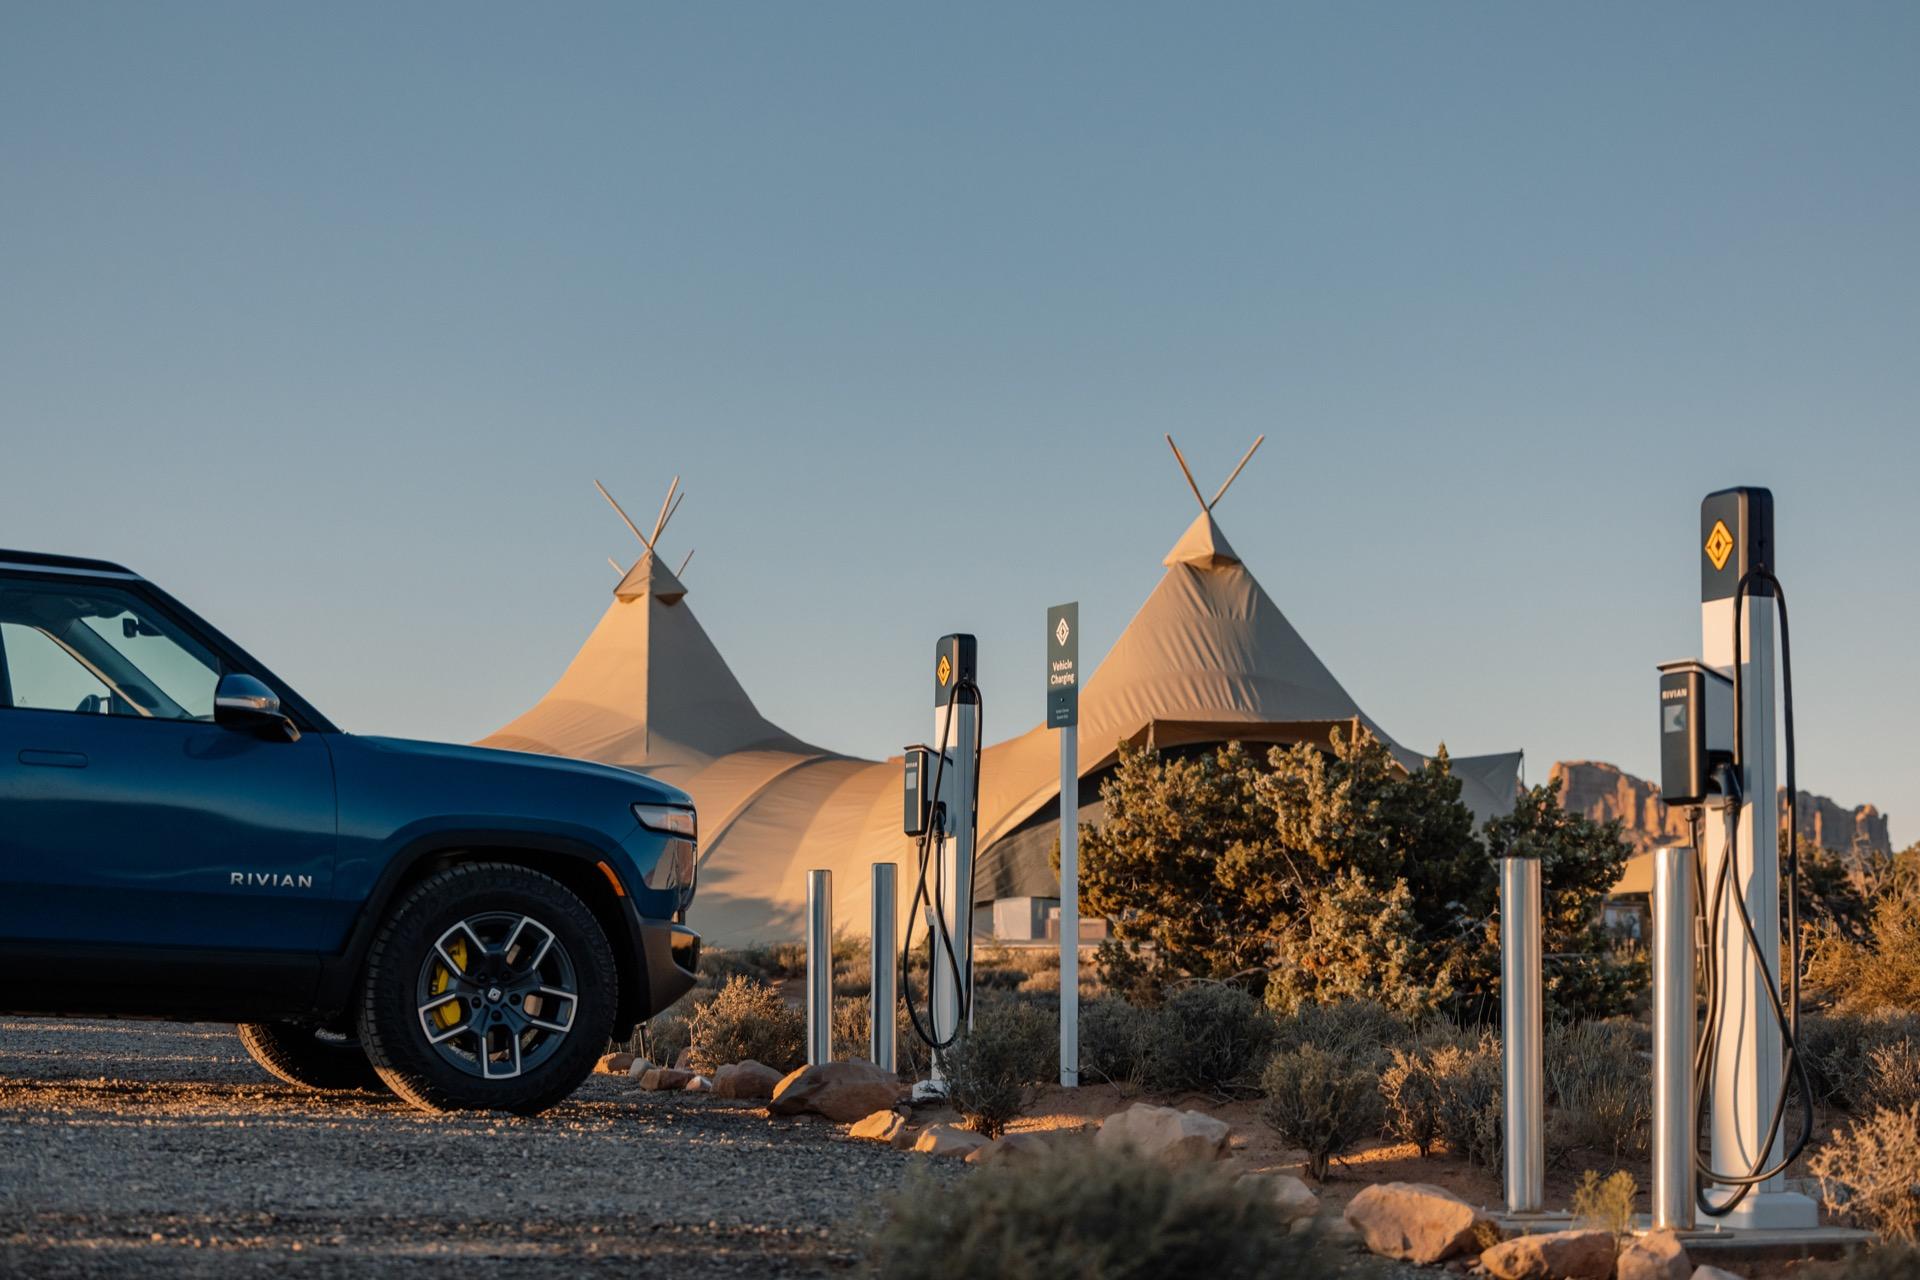 under-canvas-carbon-conscious-camp-with-rivian-waypoint-chargers–moab_100825467_h